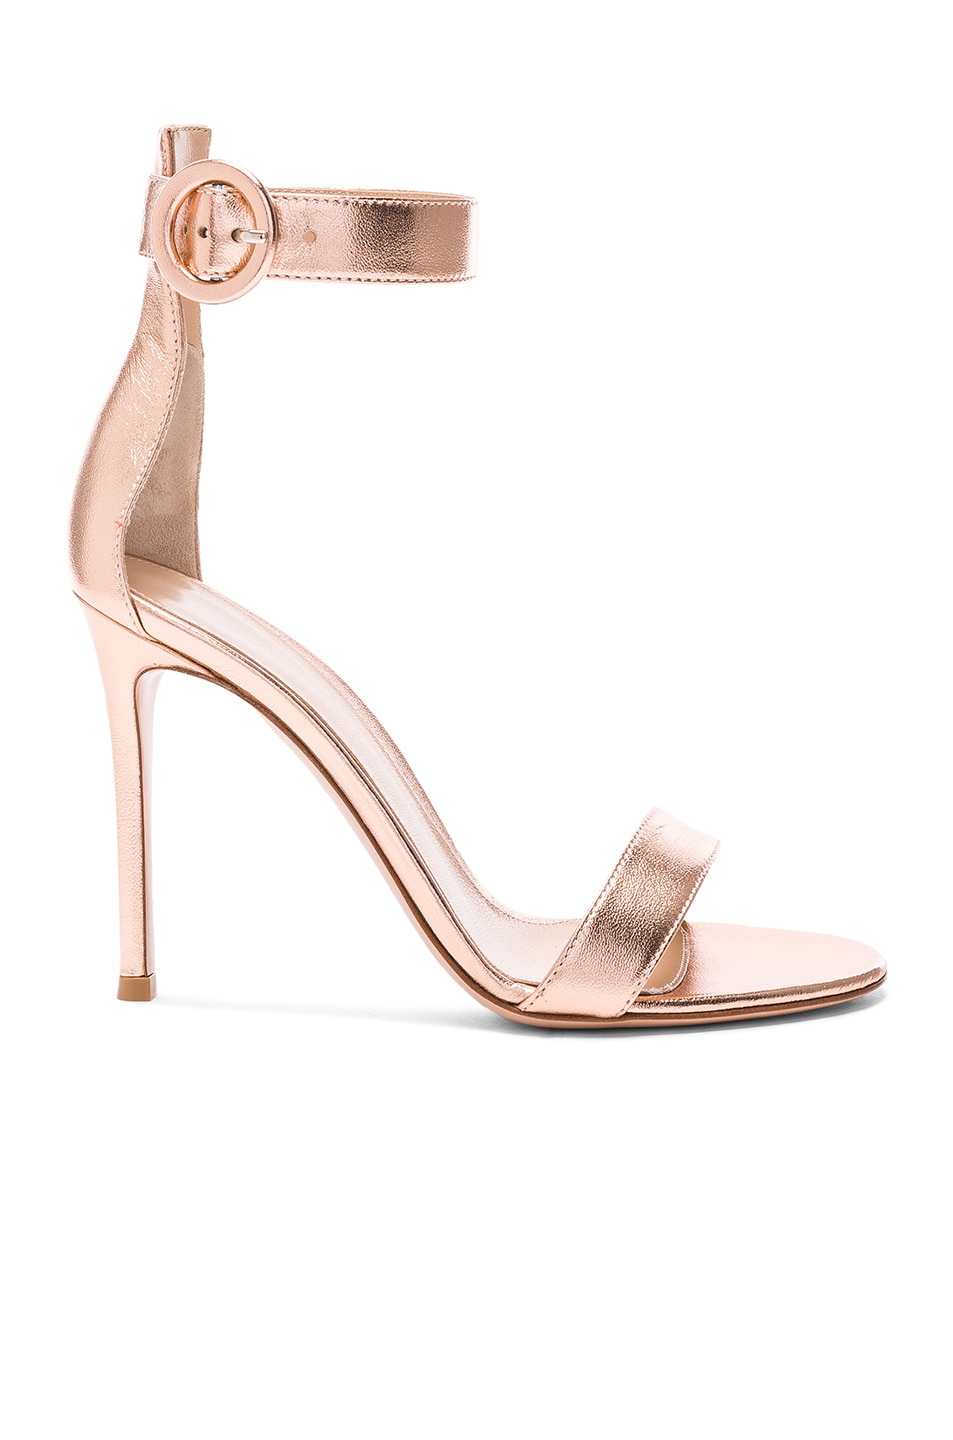 Image 1 of Gianvito Rossi Metallic Leather Ankle Strap Heels in Praline